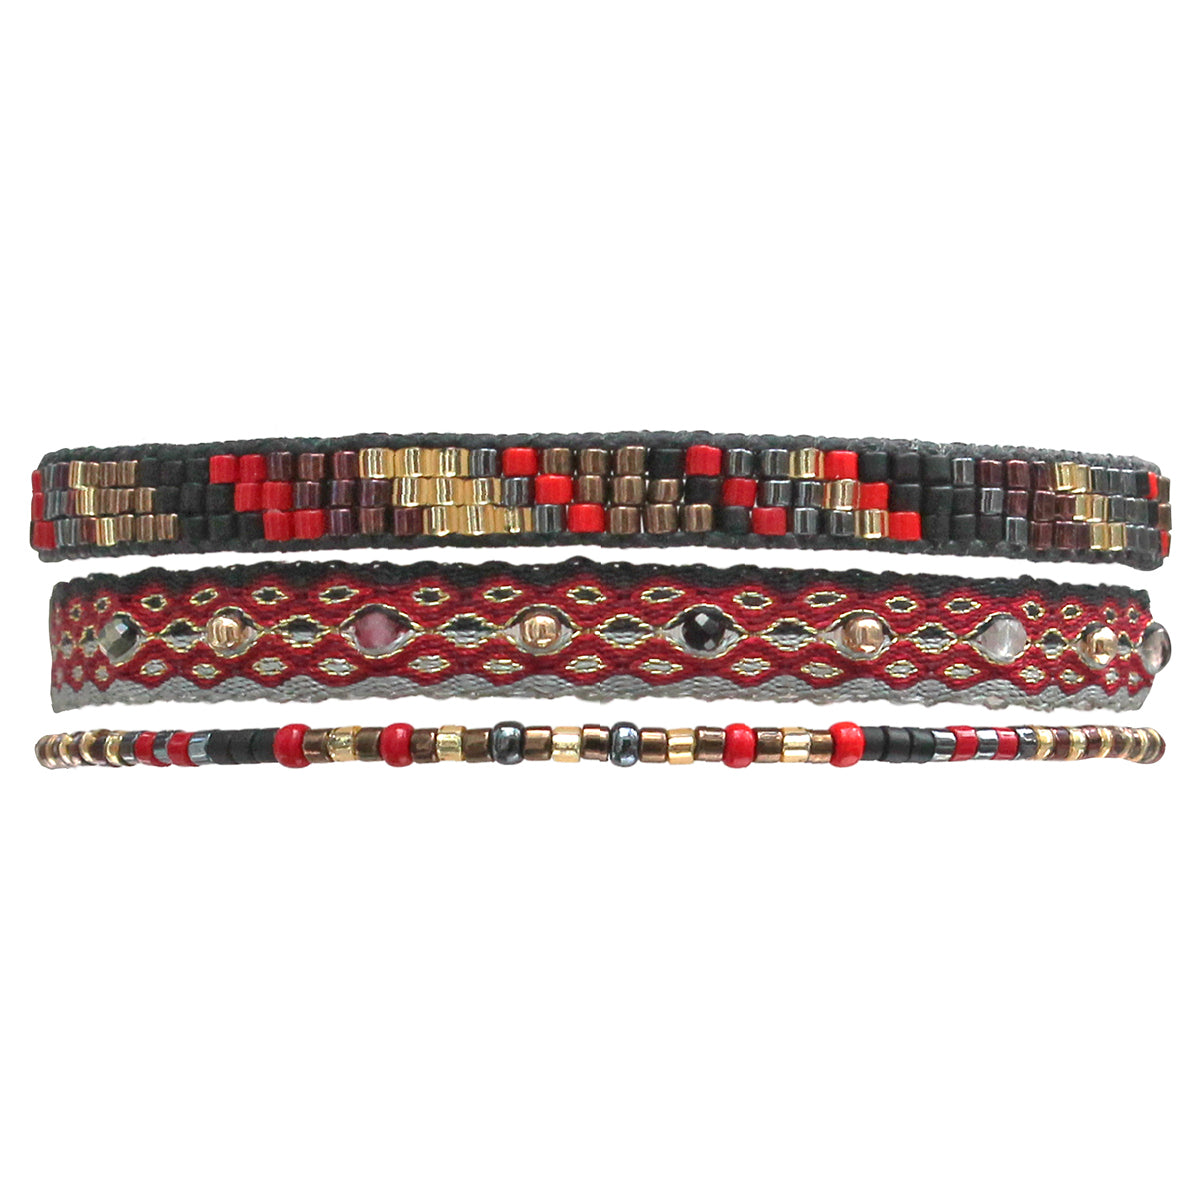 HANDWOVEN SET OF THREE BRACELETS IN RED AND BLACK TONES